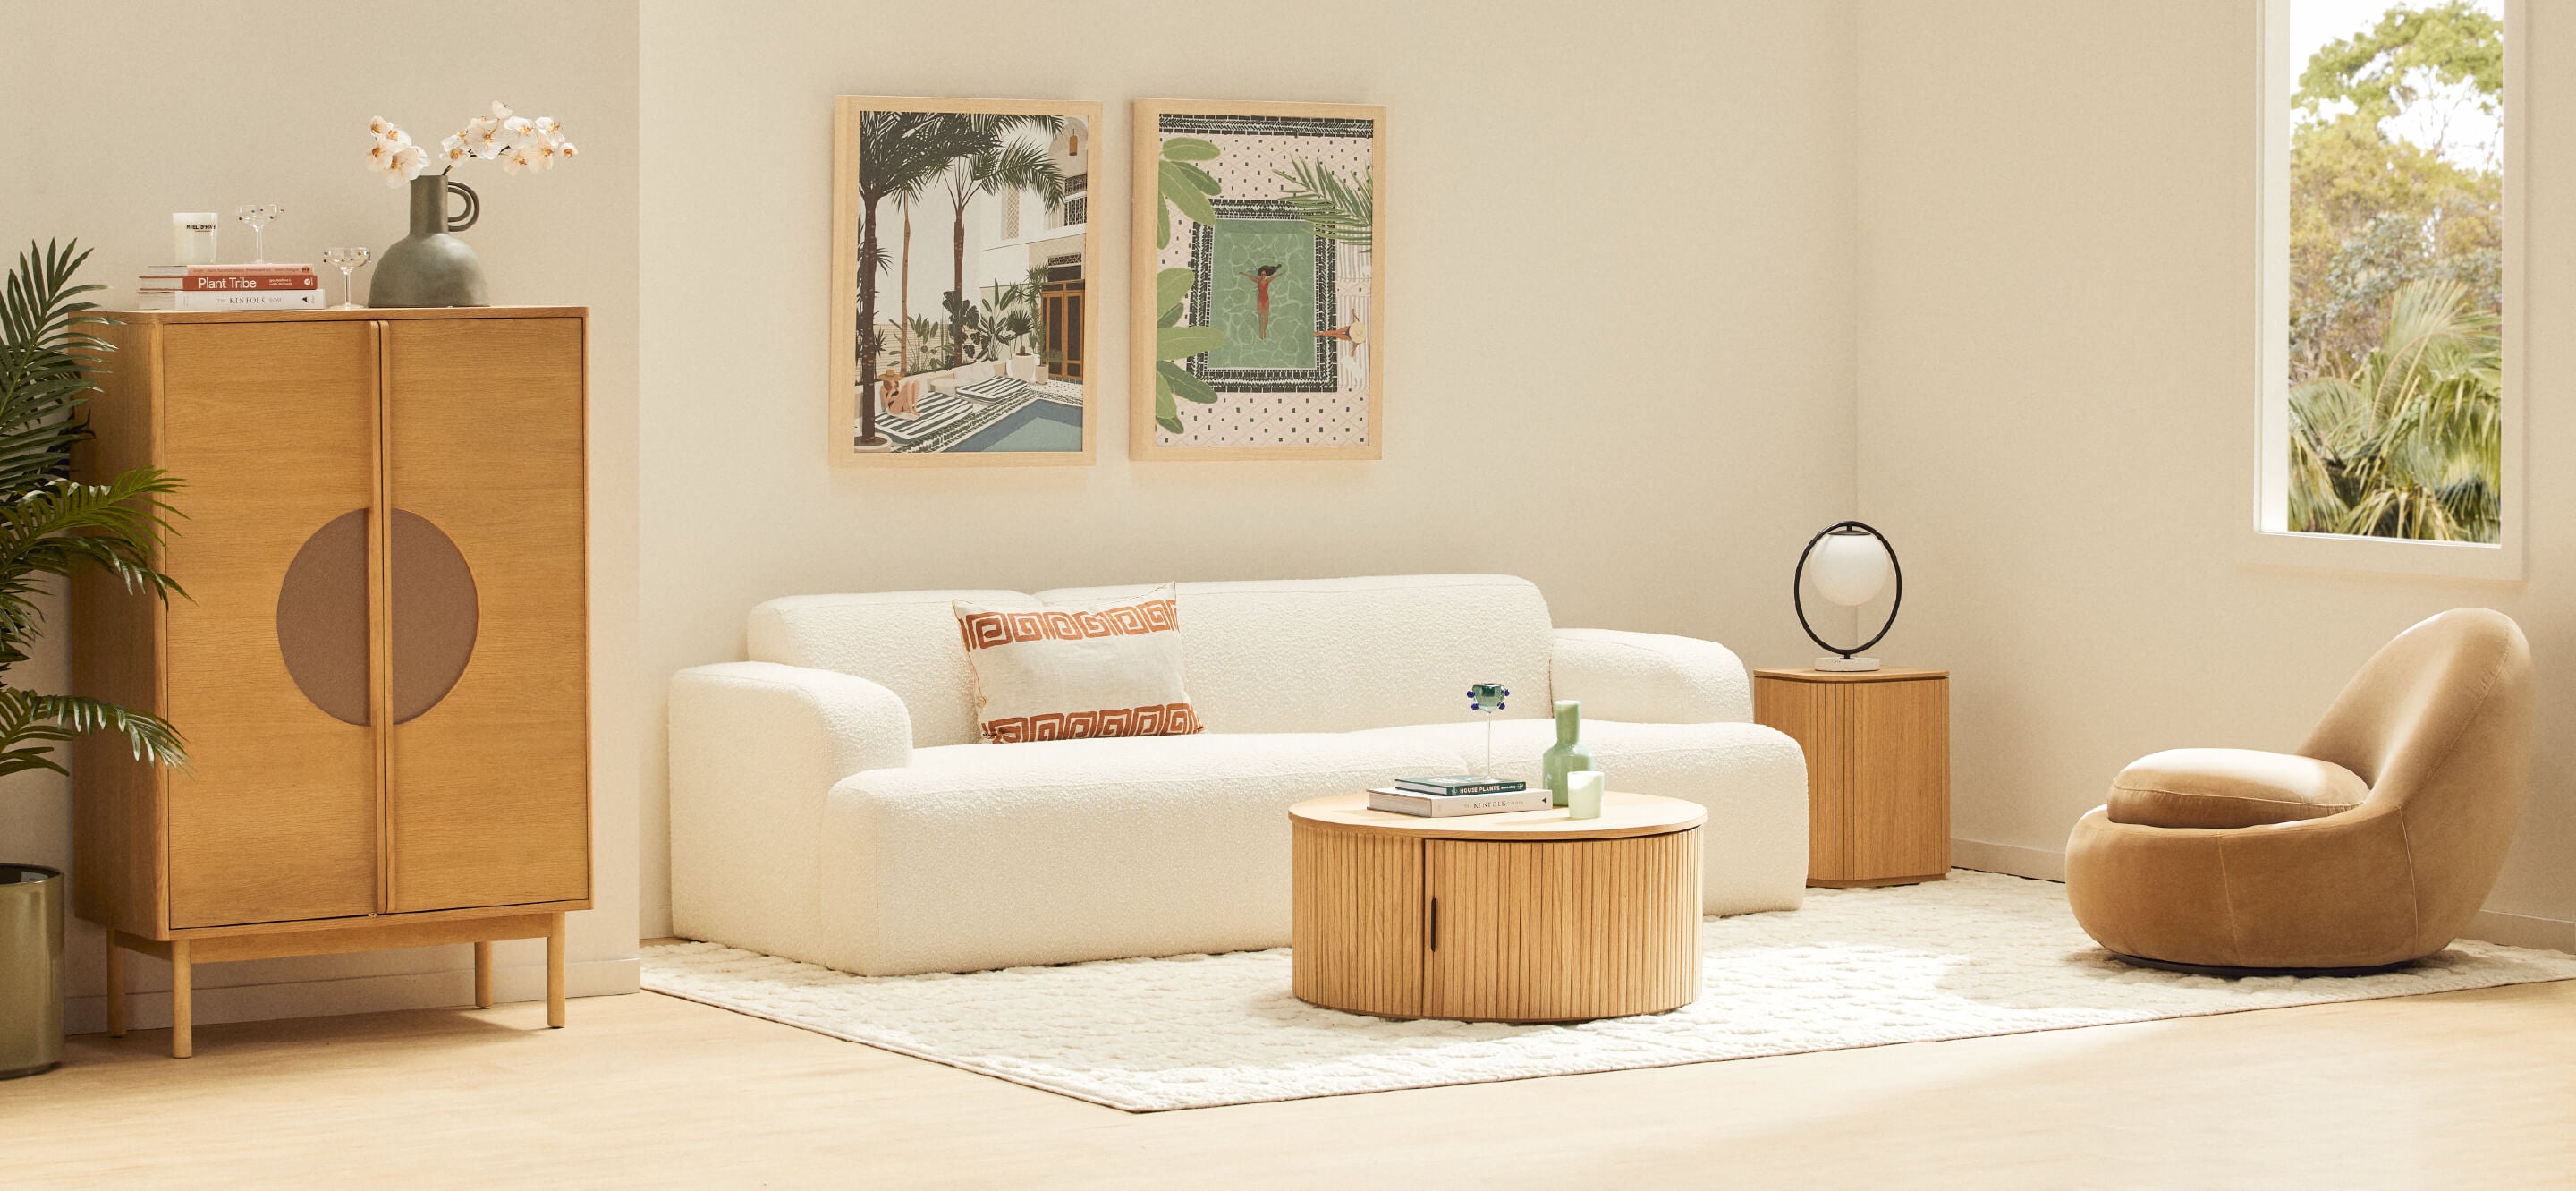 Introducing our Capsule Spring/ Summer 22 collection, the Brooklyn Living space is neutral and contemporary, full of stunning boucle pieces, coffee tables, storage and colourful home decor. Shop the collection online or in-store now!